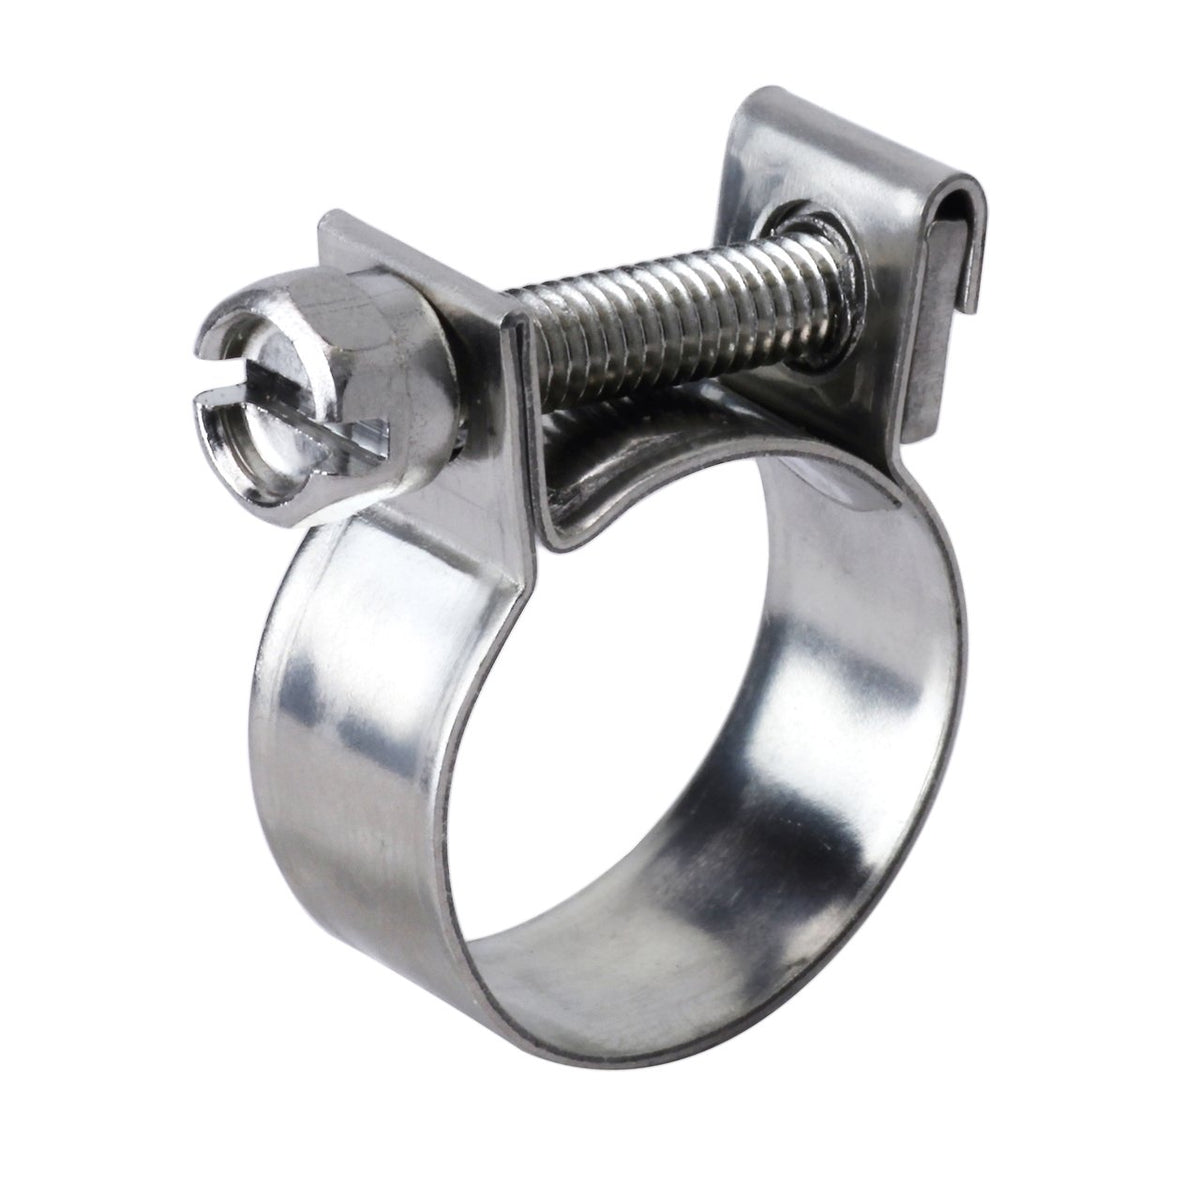 HPS Size # 13 Stainless Steel 1/4&quot; Fuel Injection Hose Clamp 7/16&quot; - 1/2&quot; (11mm - 13mm) FIC-11